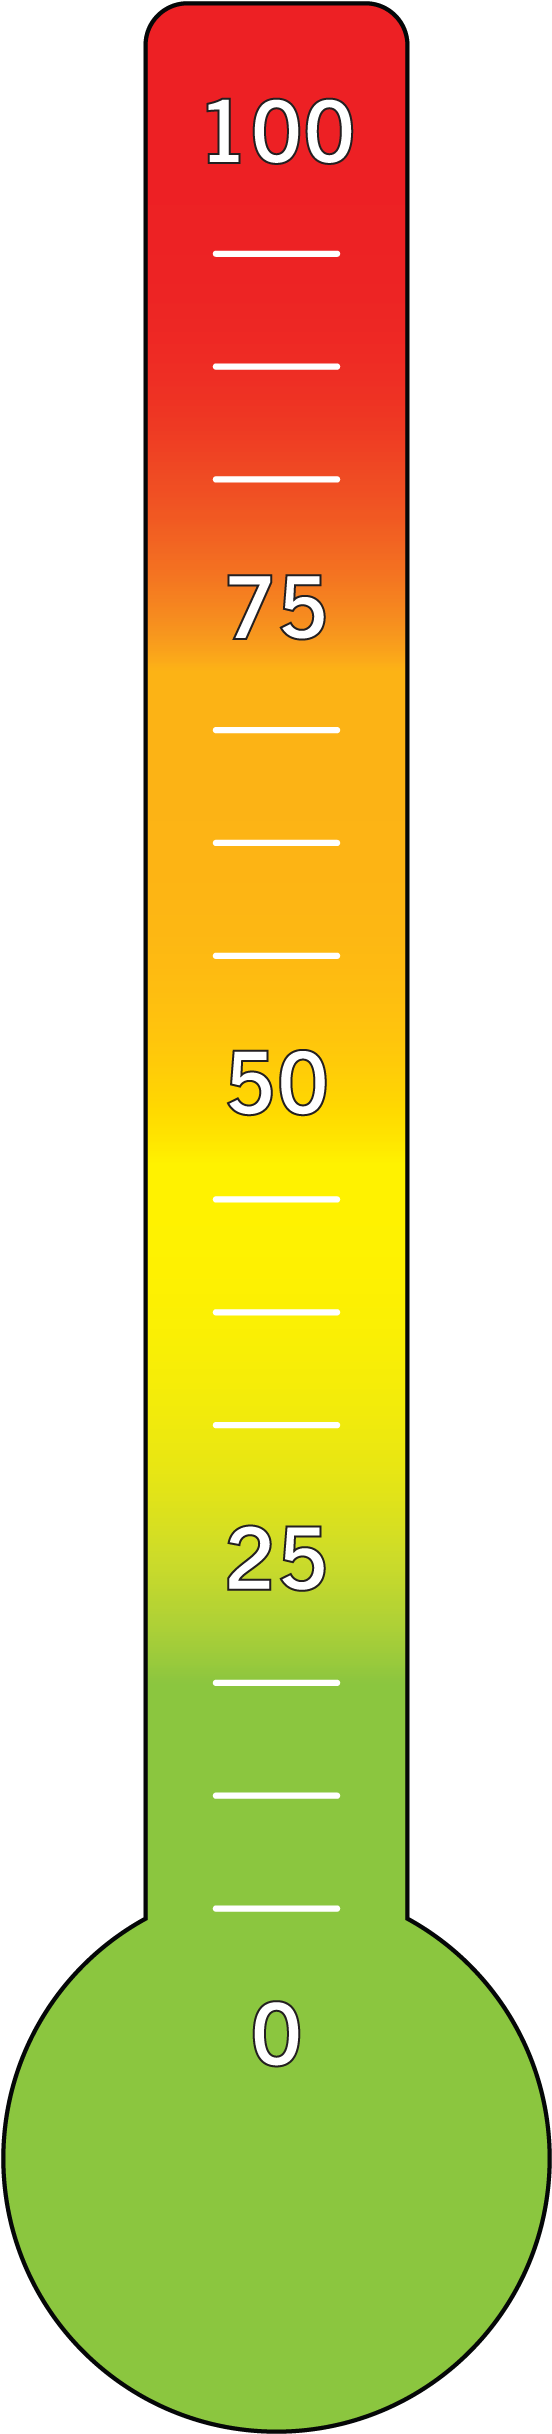 A Yellow And Orange Rectangular Object With White Text